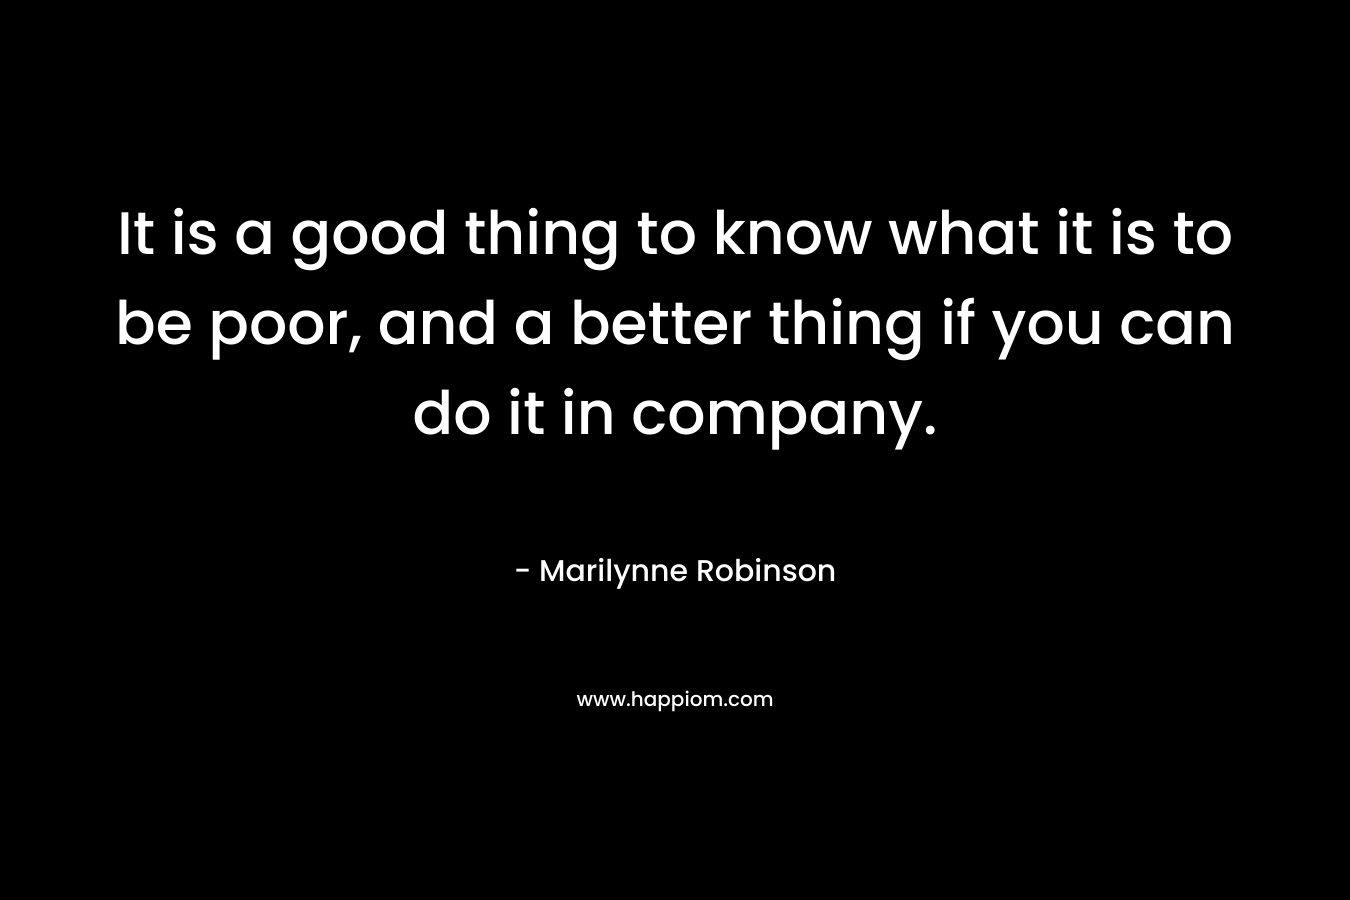 It is a good thing to know what it is to be poor, and a better thing if you can do it in company. – Marilynne Robinson